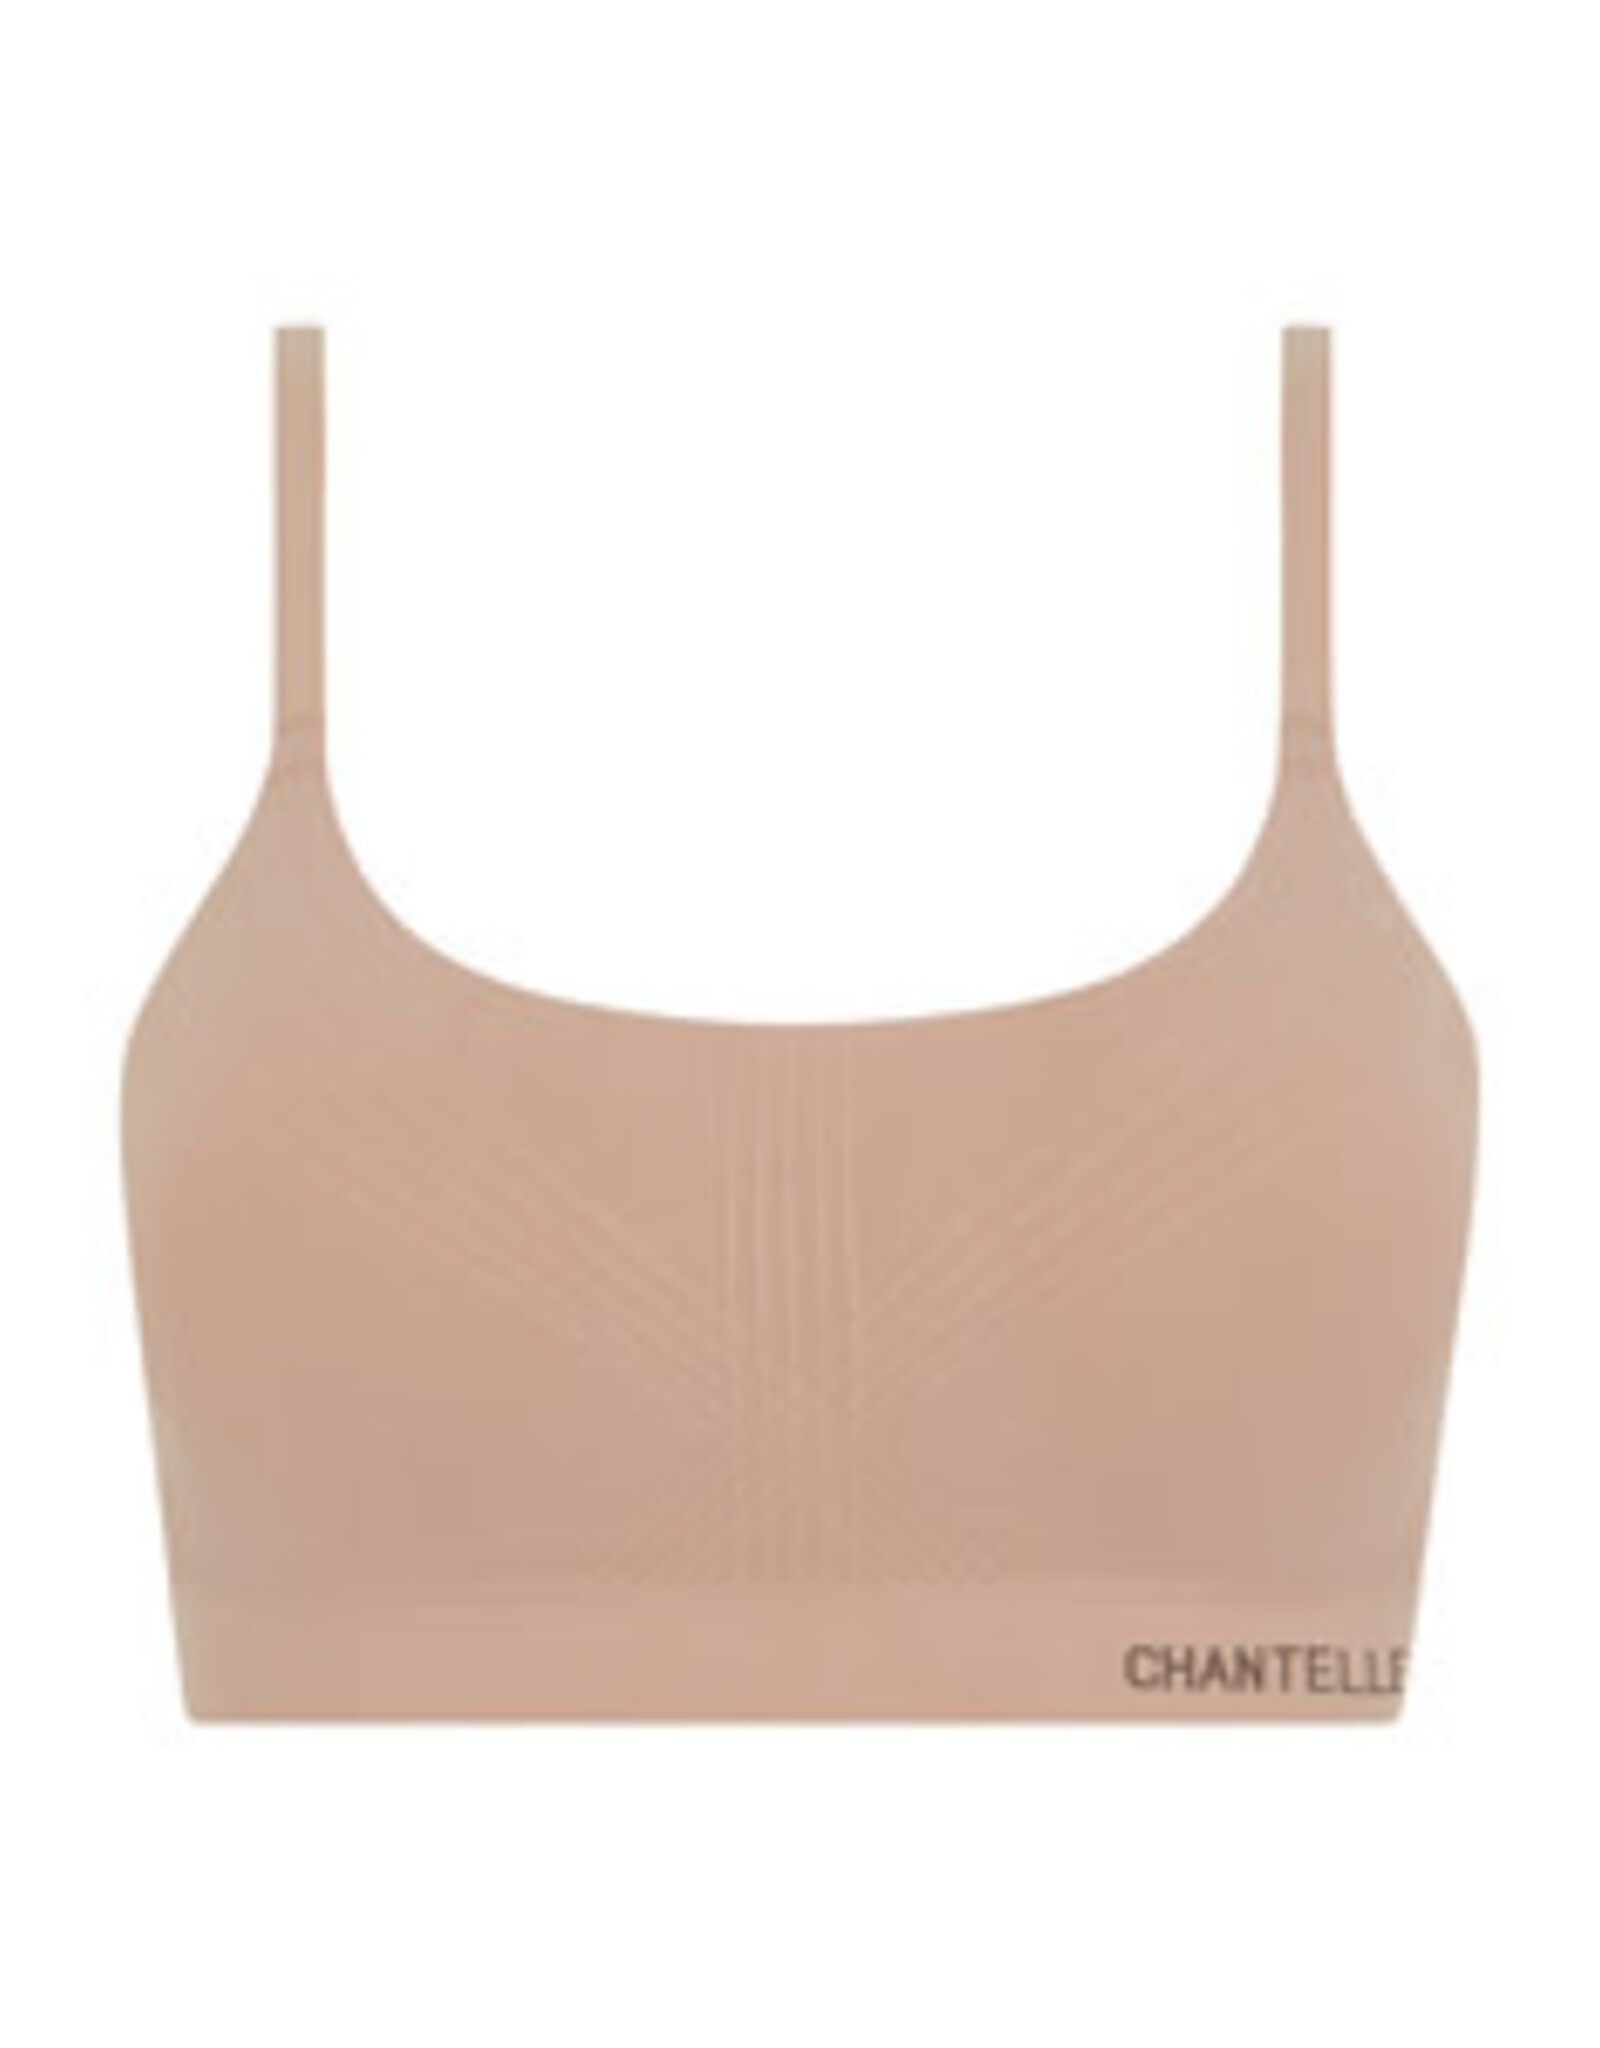 Chantelle Smooth Comfort Wire-Free Support Bra - Underwraps Lingerie